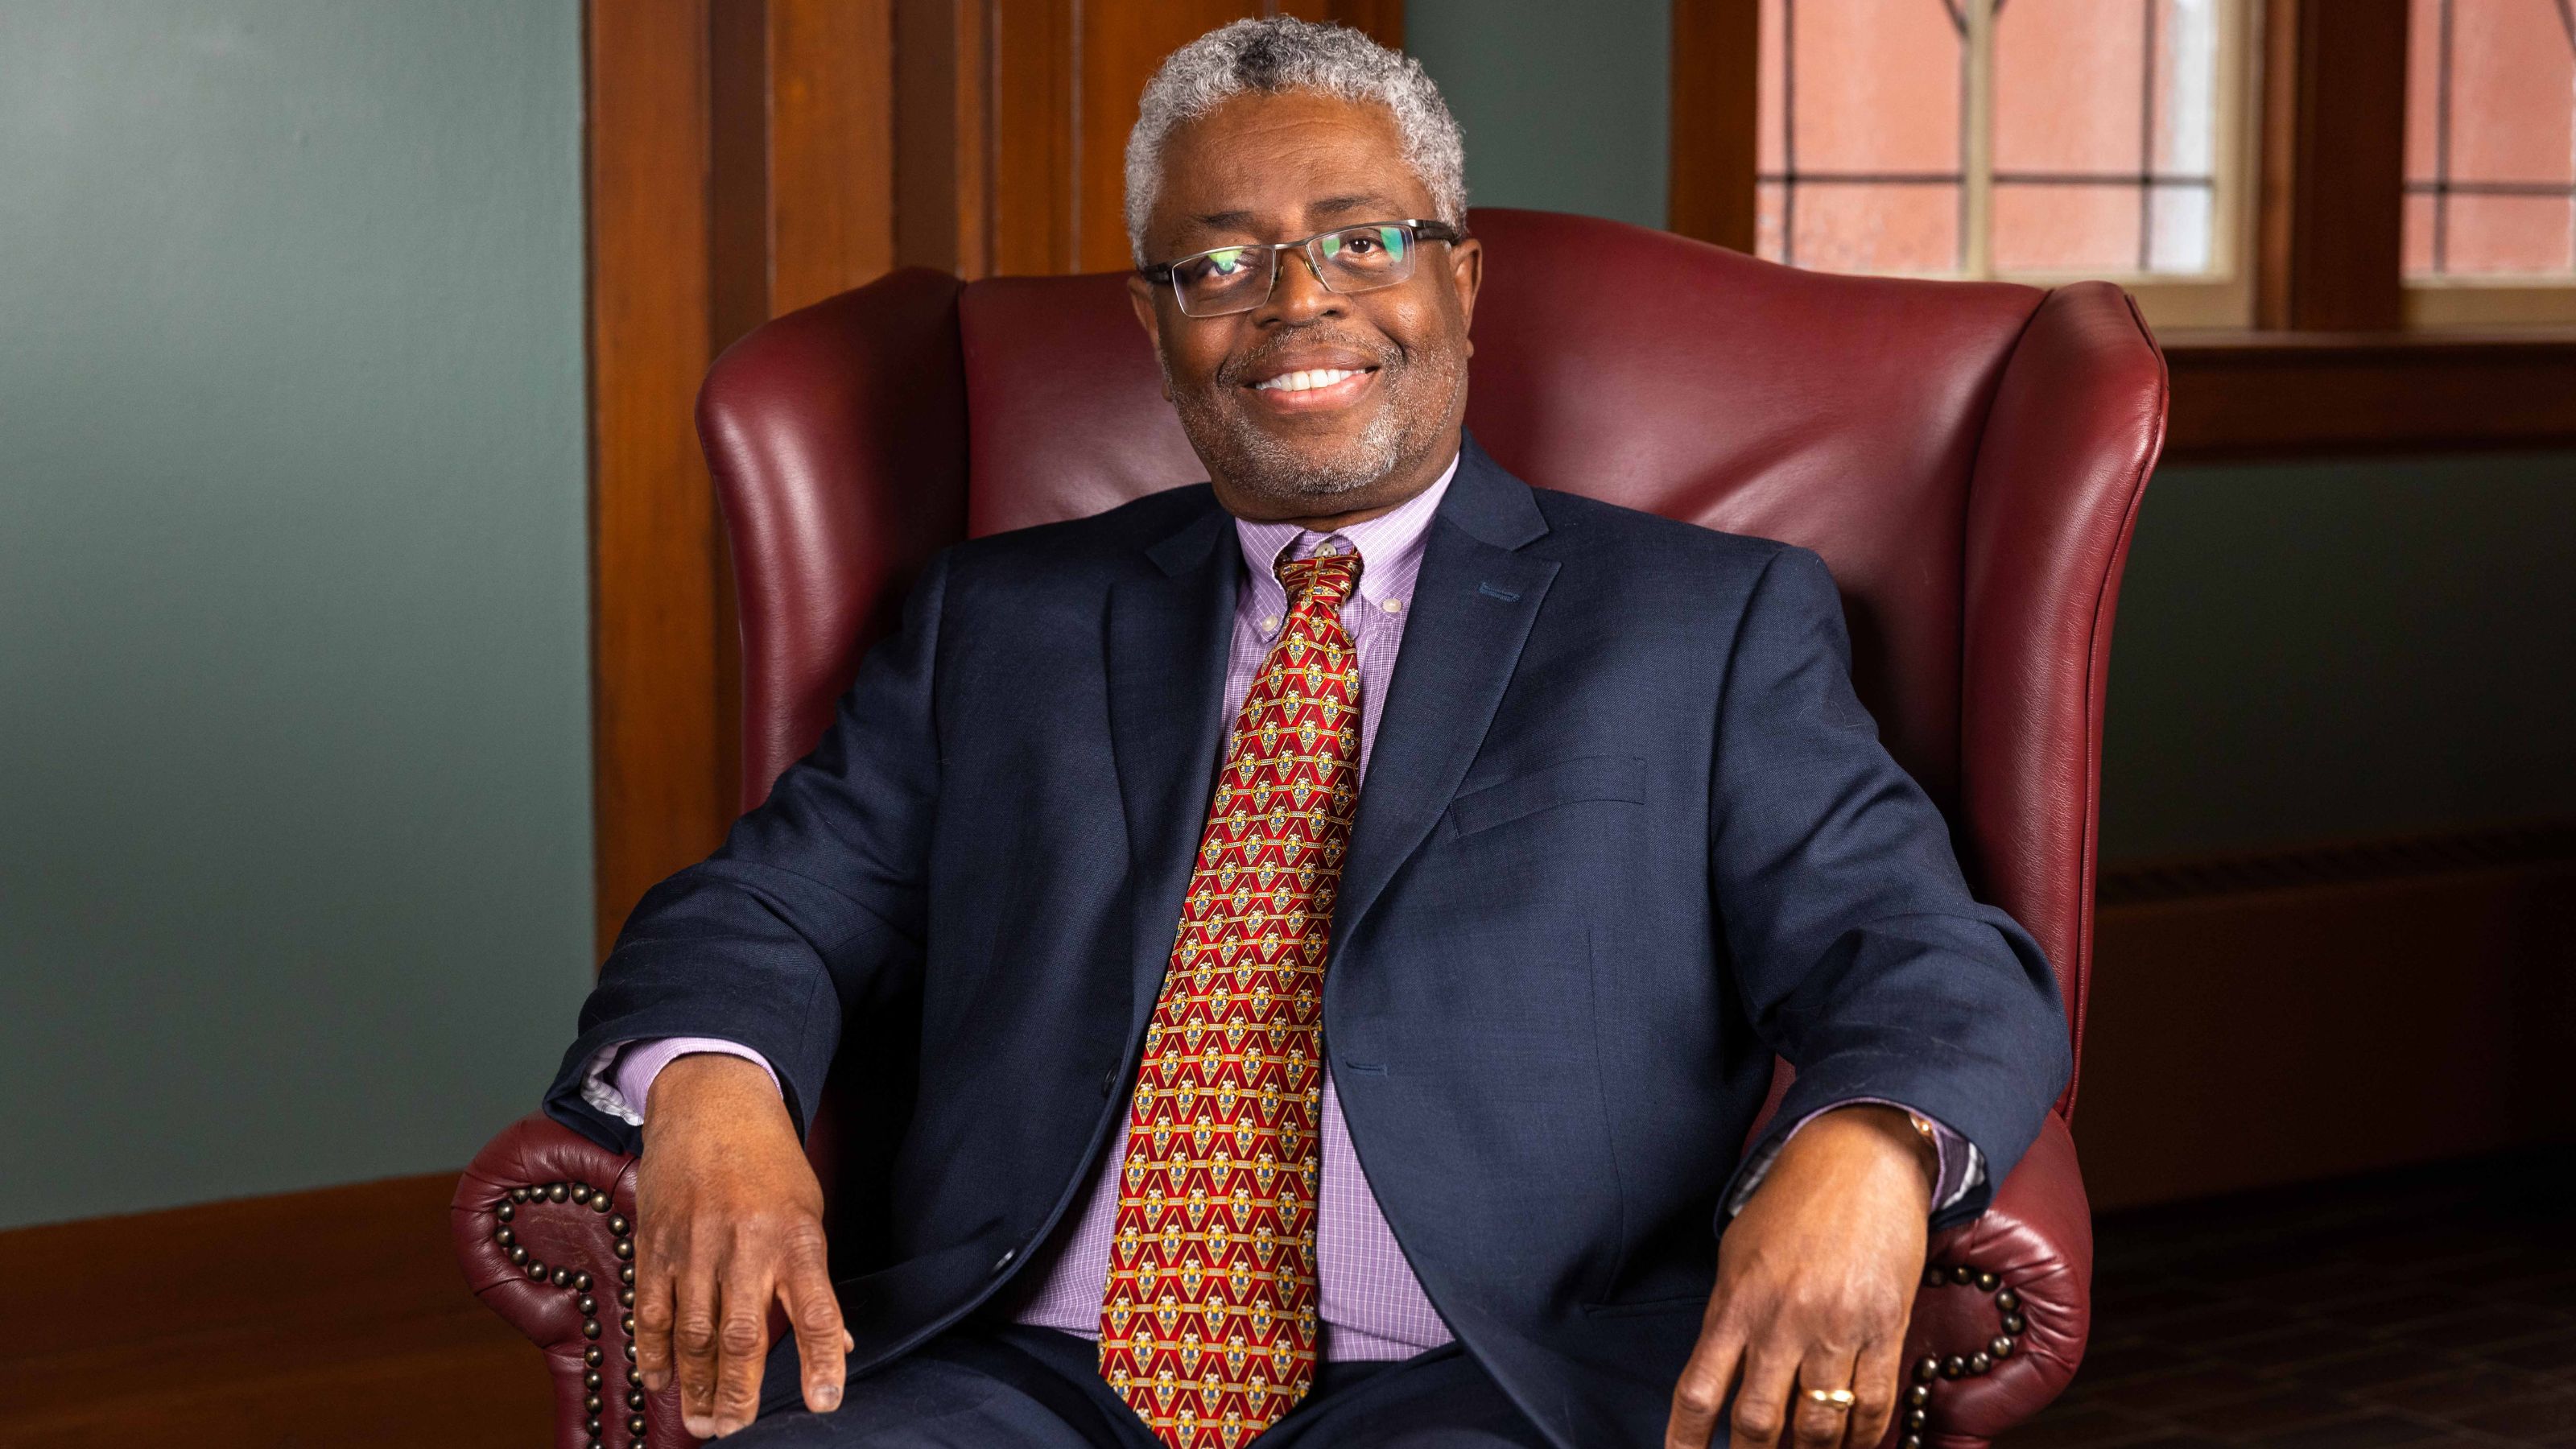 Dr. Andy Knight, Provost Fellow in Black Excellence and Leadership, Professor of International Relations in the Department of Political Science at the University of Alberta and University of Alberta Distinguished Professor